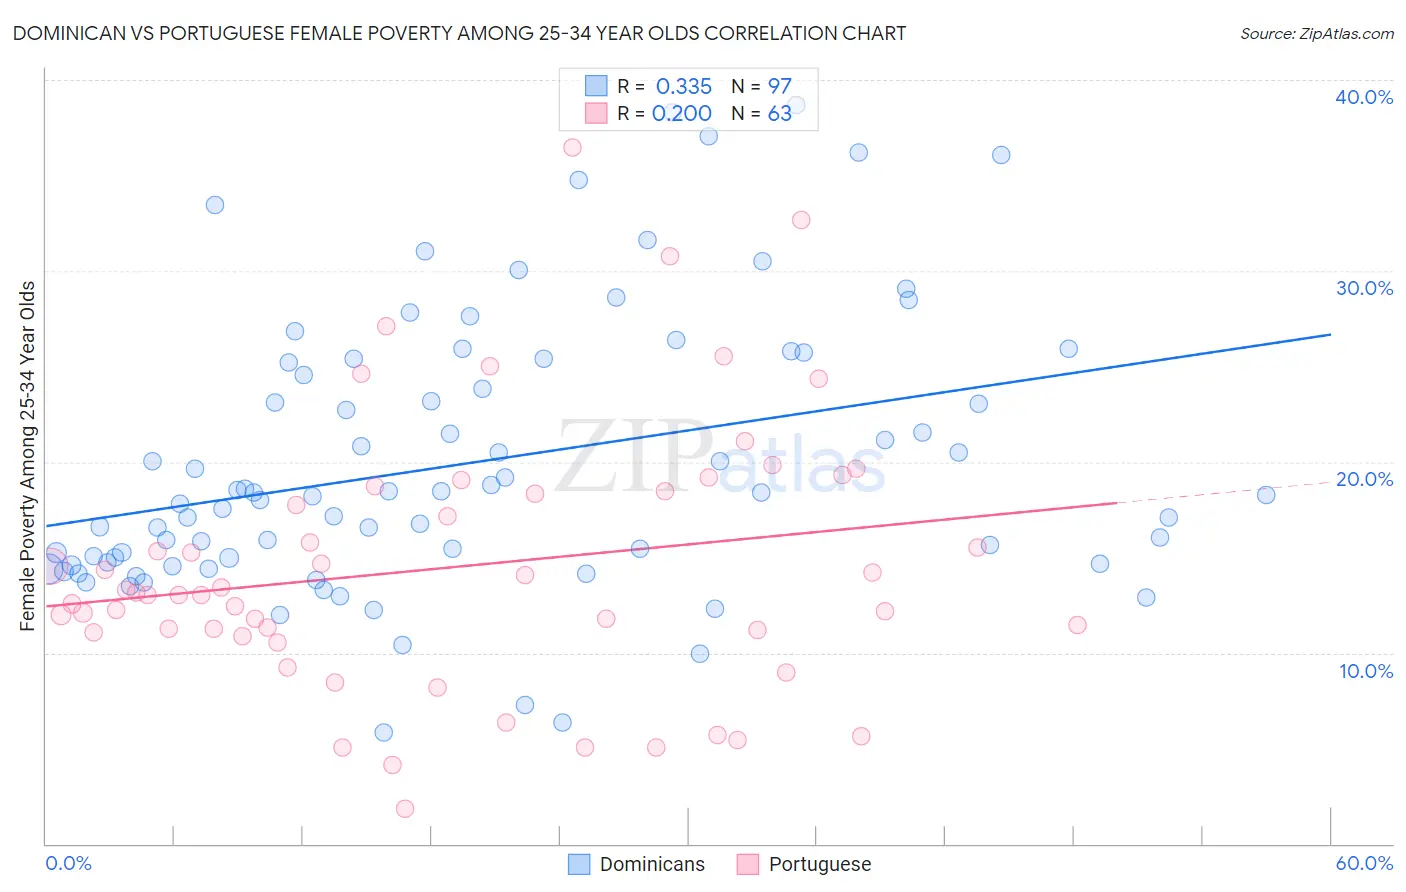 Dominican vs Portuguese Female Poverty Among 25-34 Year Olds